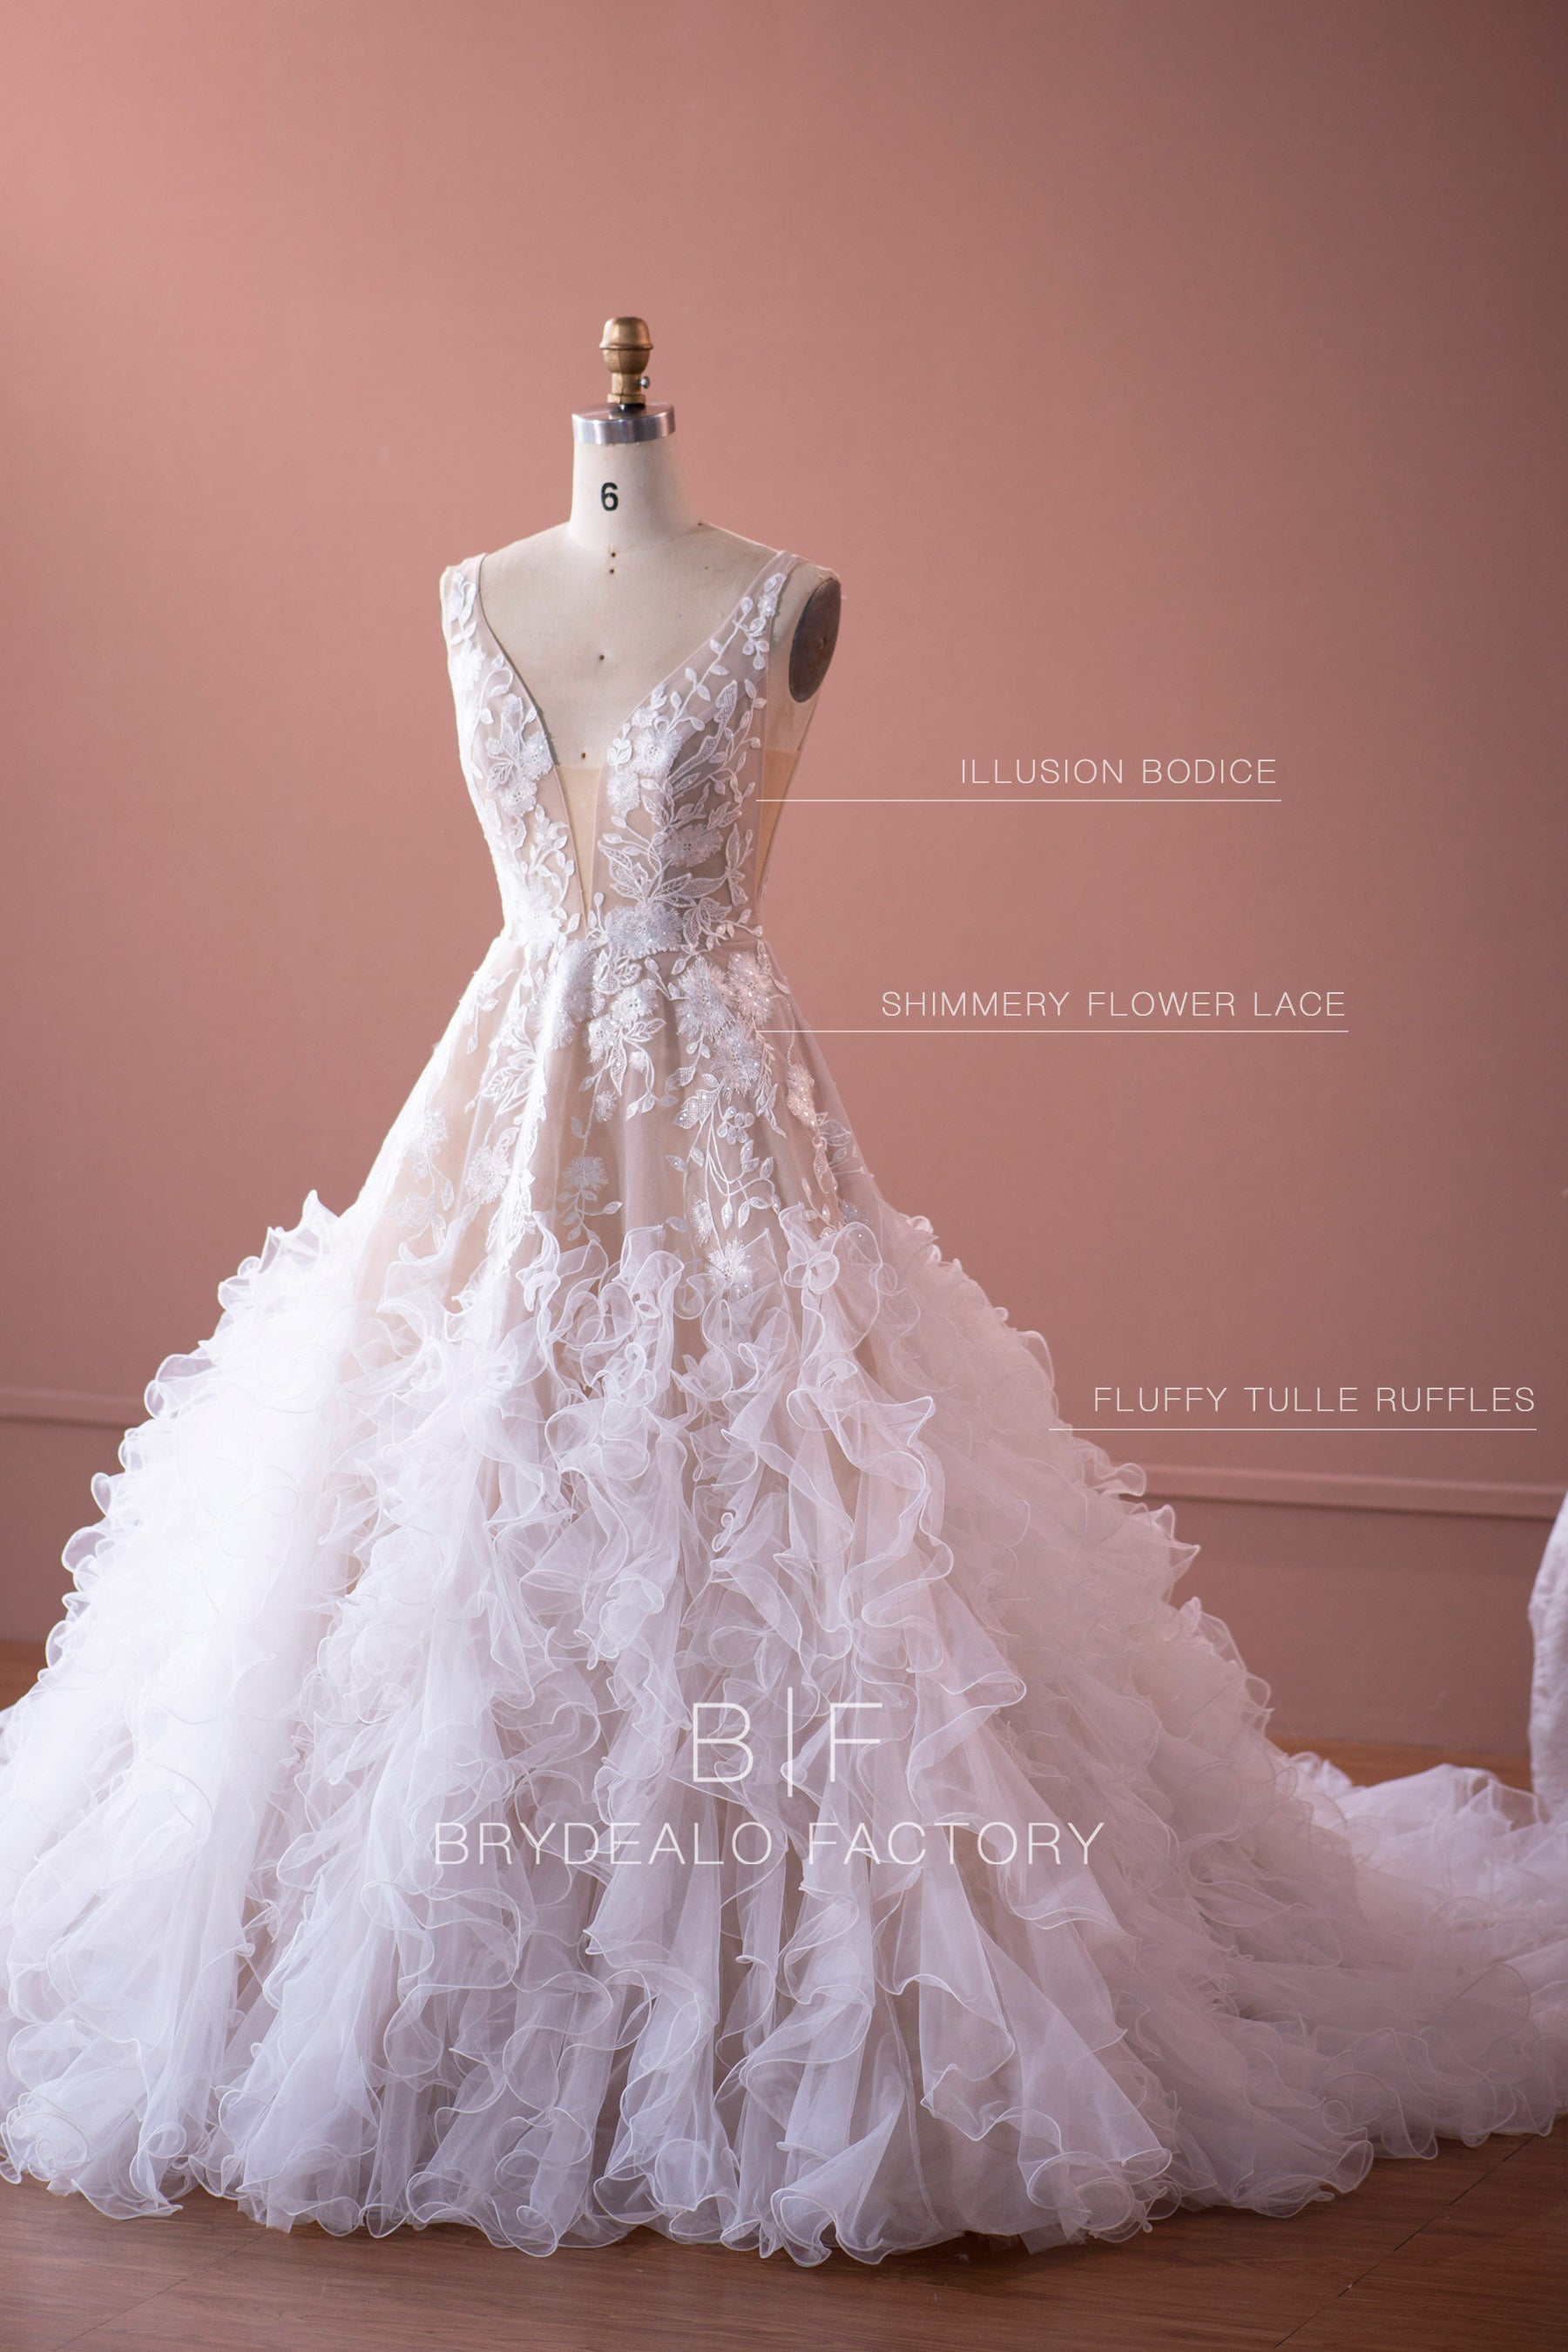 Designer Flower Lace Ruffled Tulle Puffy Wedding Dress for wholesale